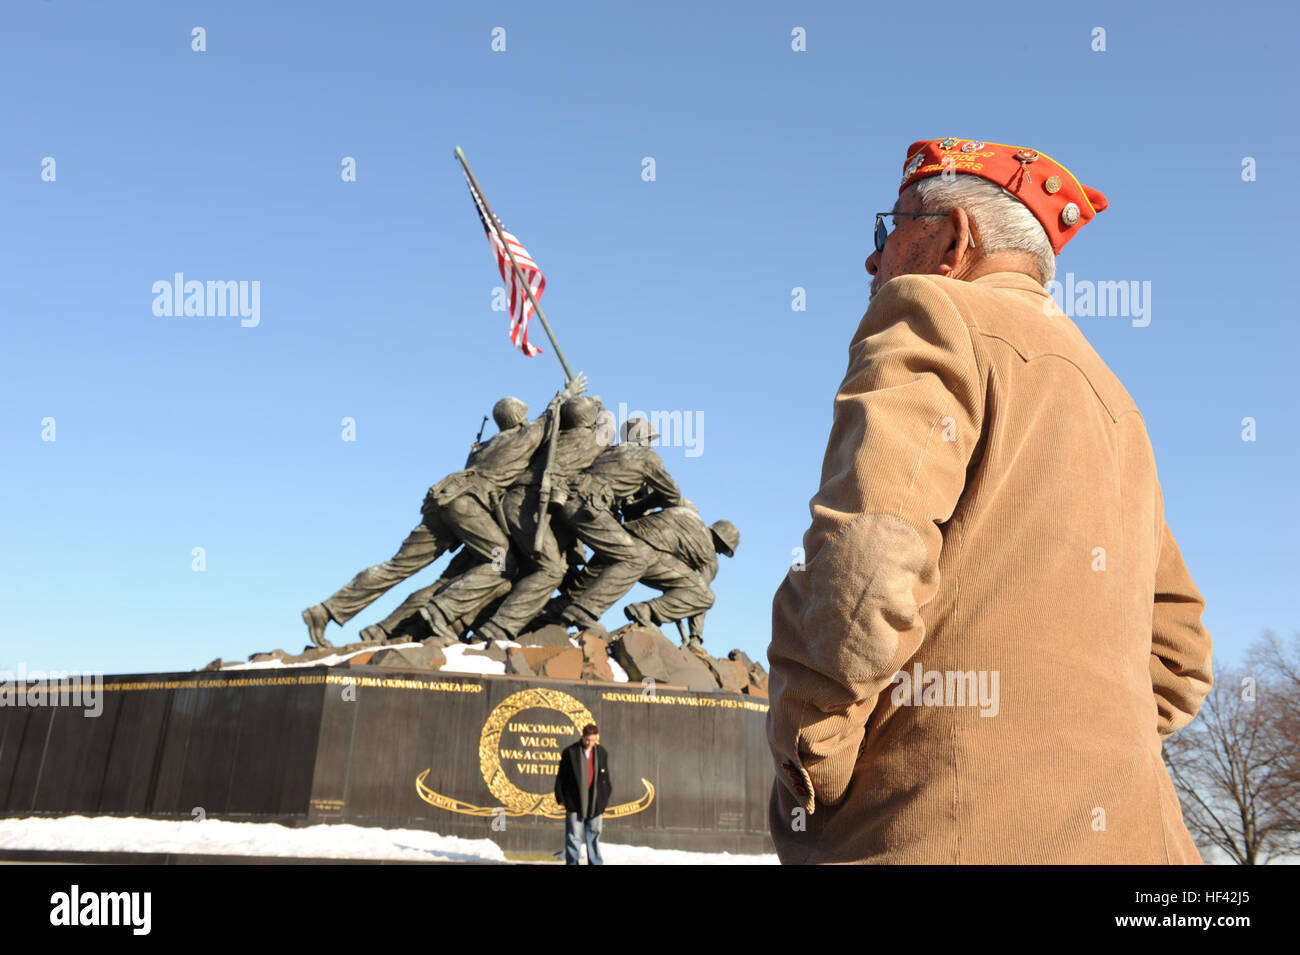 William H. Toledo, a U.S. Marine Corps World War II veteran, looks at the Marine Corps War Memorial statue before the wreath laying ceremony commemorating the 65th anniversary of the Battle of Iwo Jima at Arlington, Va., Feb. 19, 2010. Toledo is a surviving Navajo code talker who fought in the battle. (U.S. Marine Corps photo by Sgt. Alvin Williams/Released) Defense.gov photo essay 100219-M-1549W-012 Stock Photo